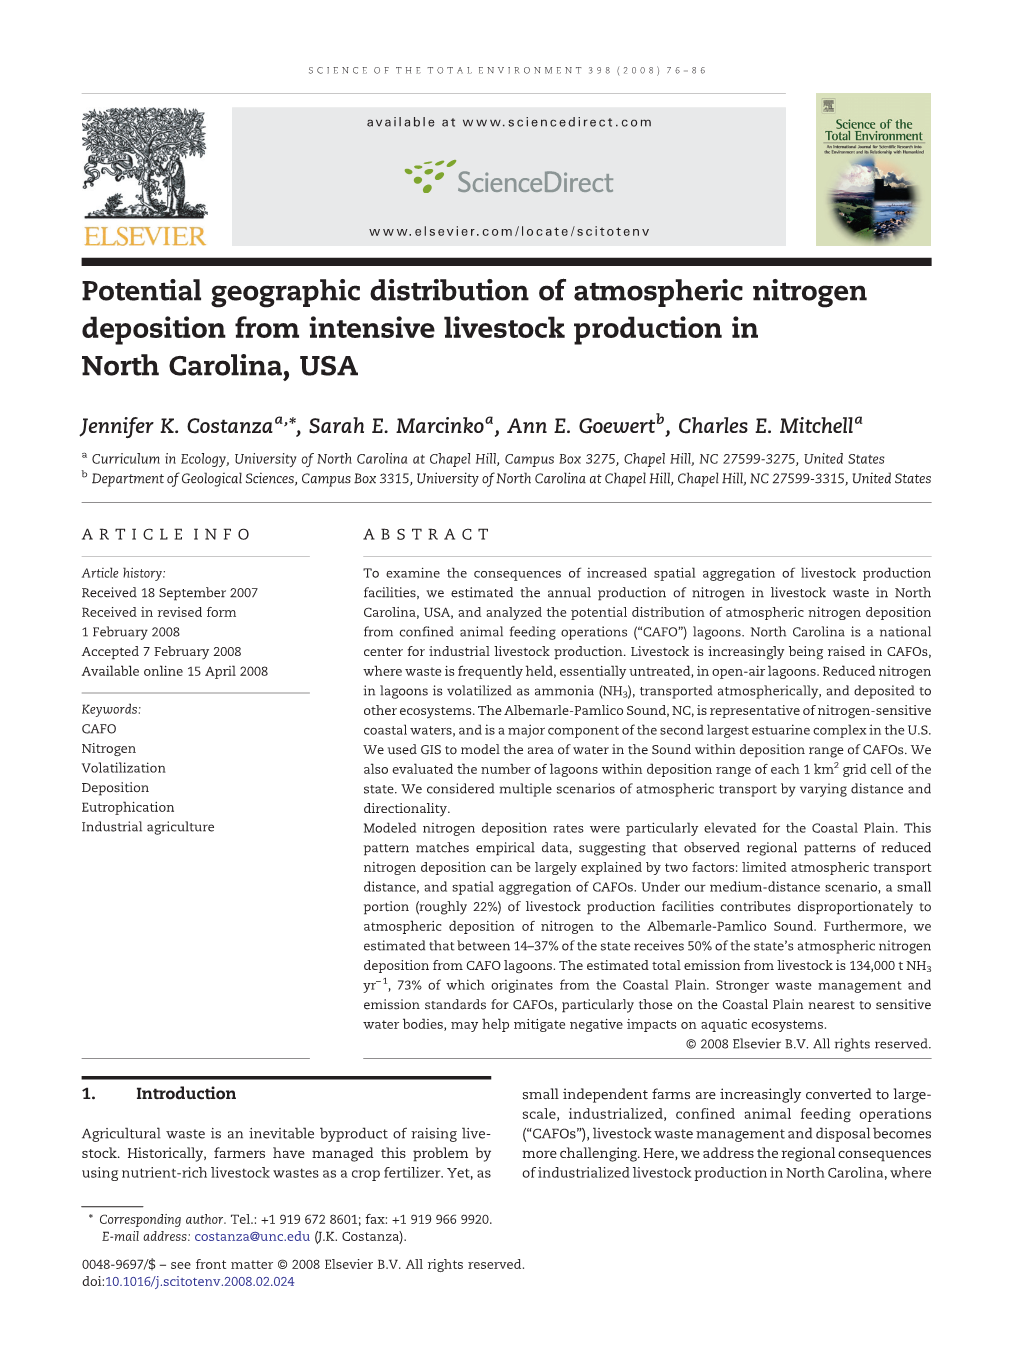 Potential Geographic Distribution of Atmospheric Nitrogen Deposition from Intensive Livestock Production in North Carolina, USA